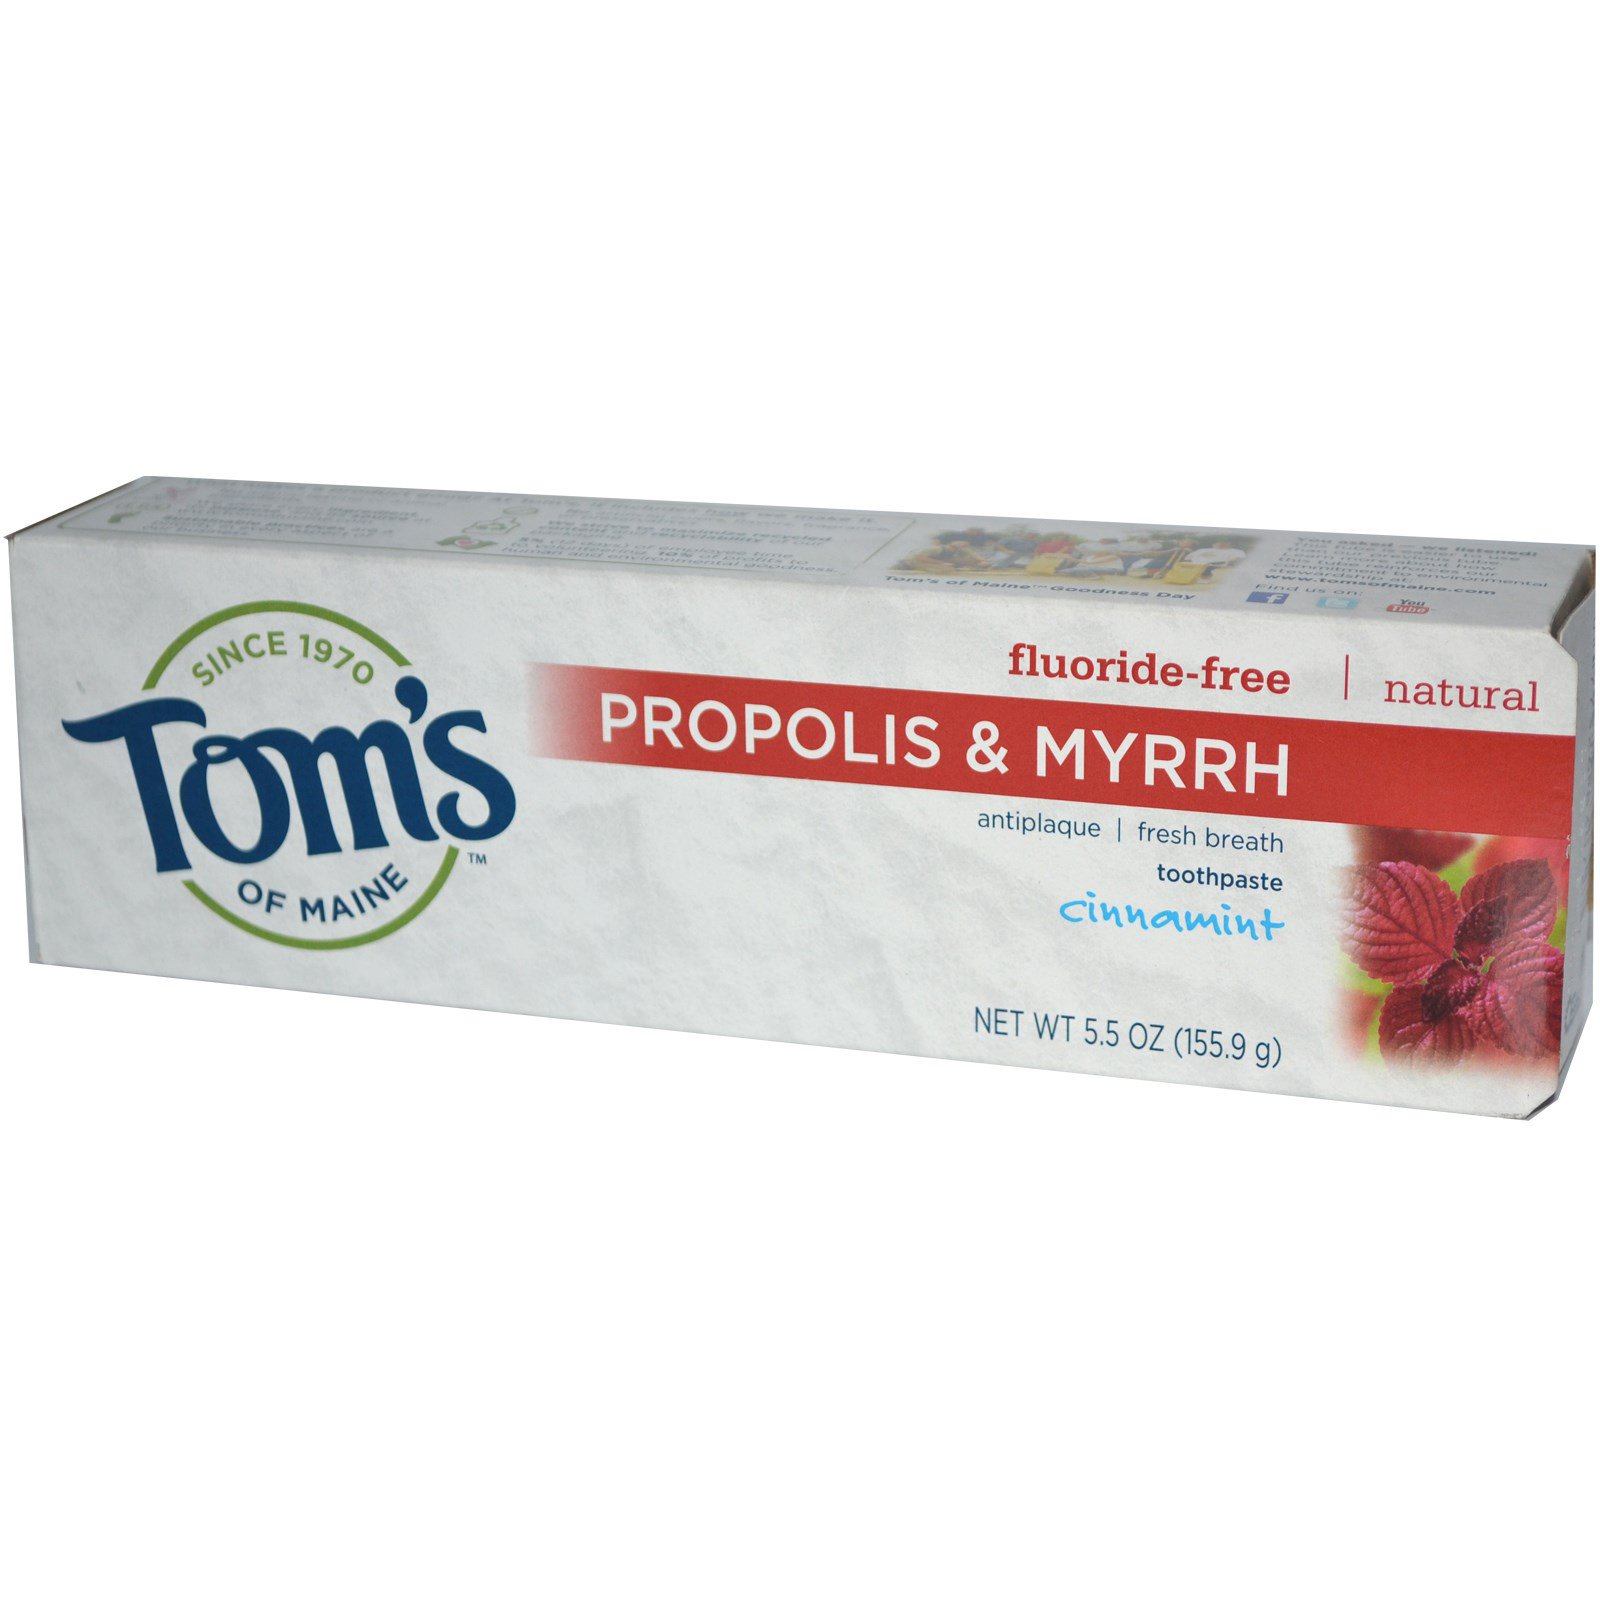 The Tom’s of Maine propolis and myrrh travel product recommended by Paul Marrero on Pretty Progressive.